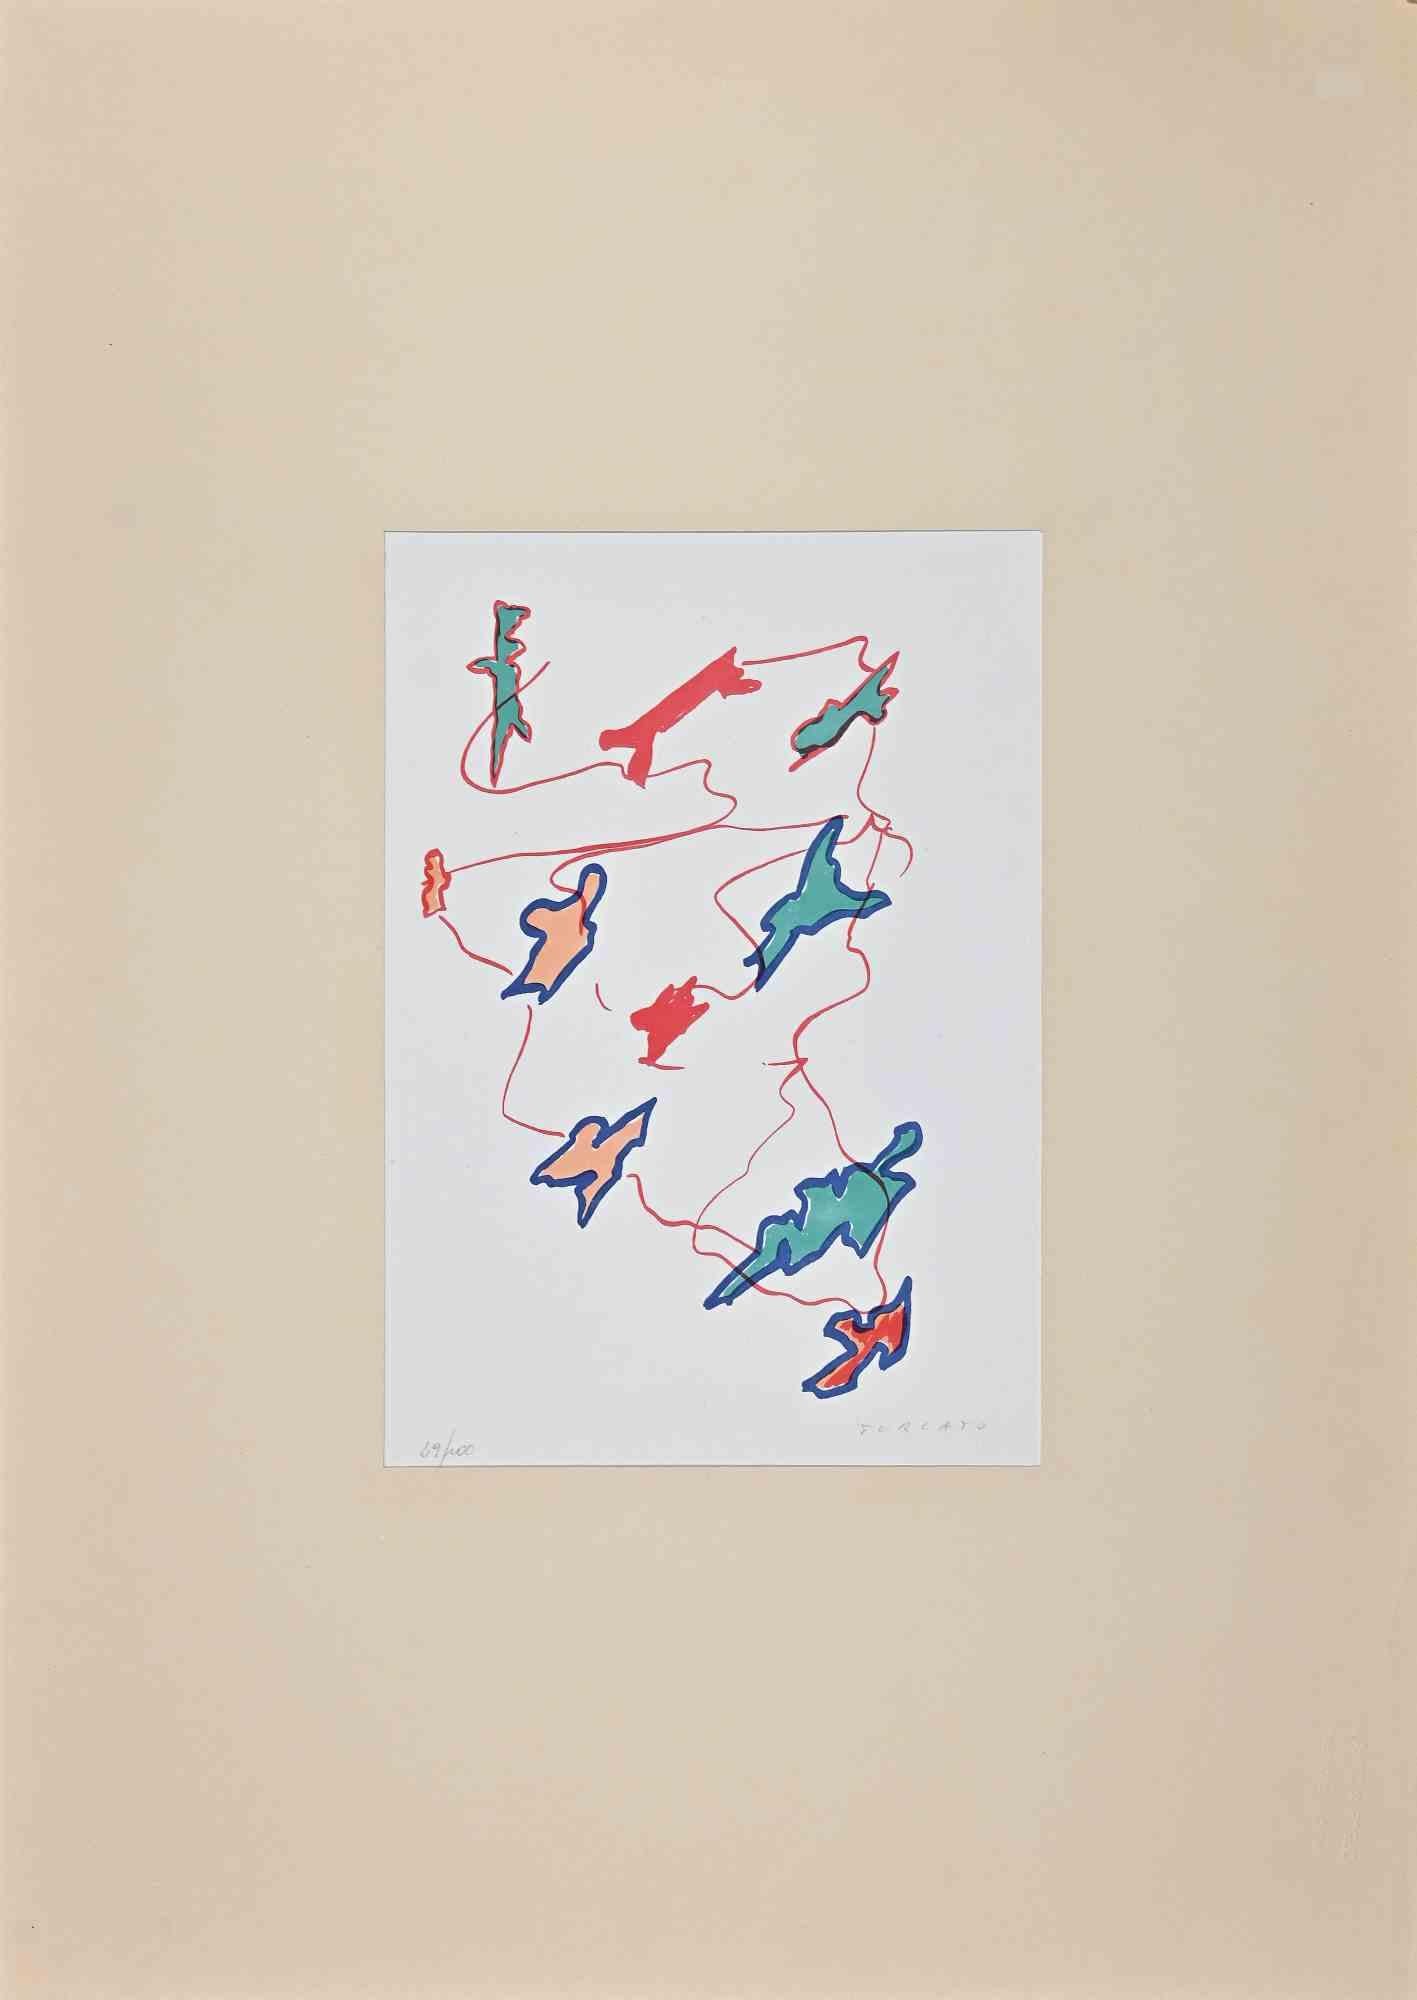 Abstract Composition is a colored lithograph print realized by the contemporary artist Giulio Turcato in 1973.

Hand-signed in pencil on the lower right.

Numbered on the lower margin, edition 49/100.

Authenticity label of La Nuova Foglio on the